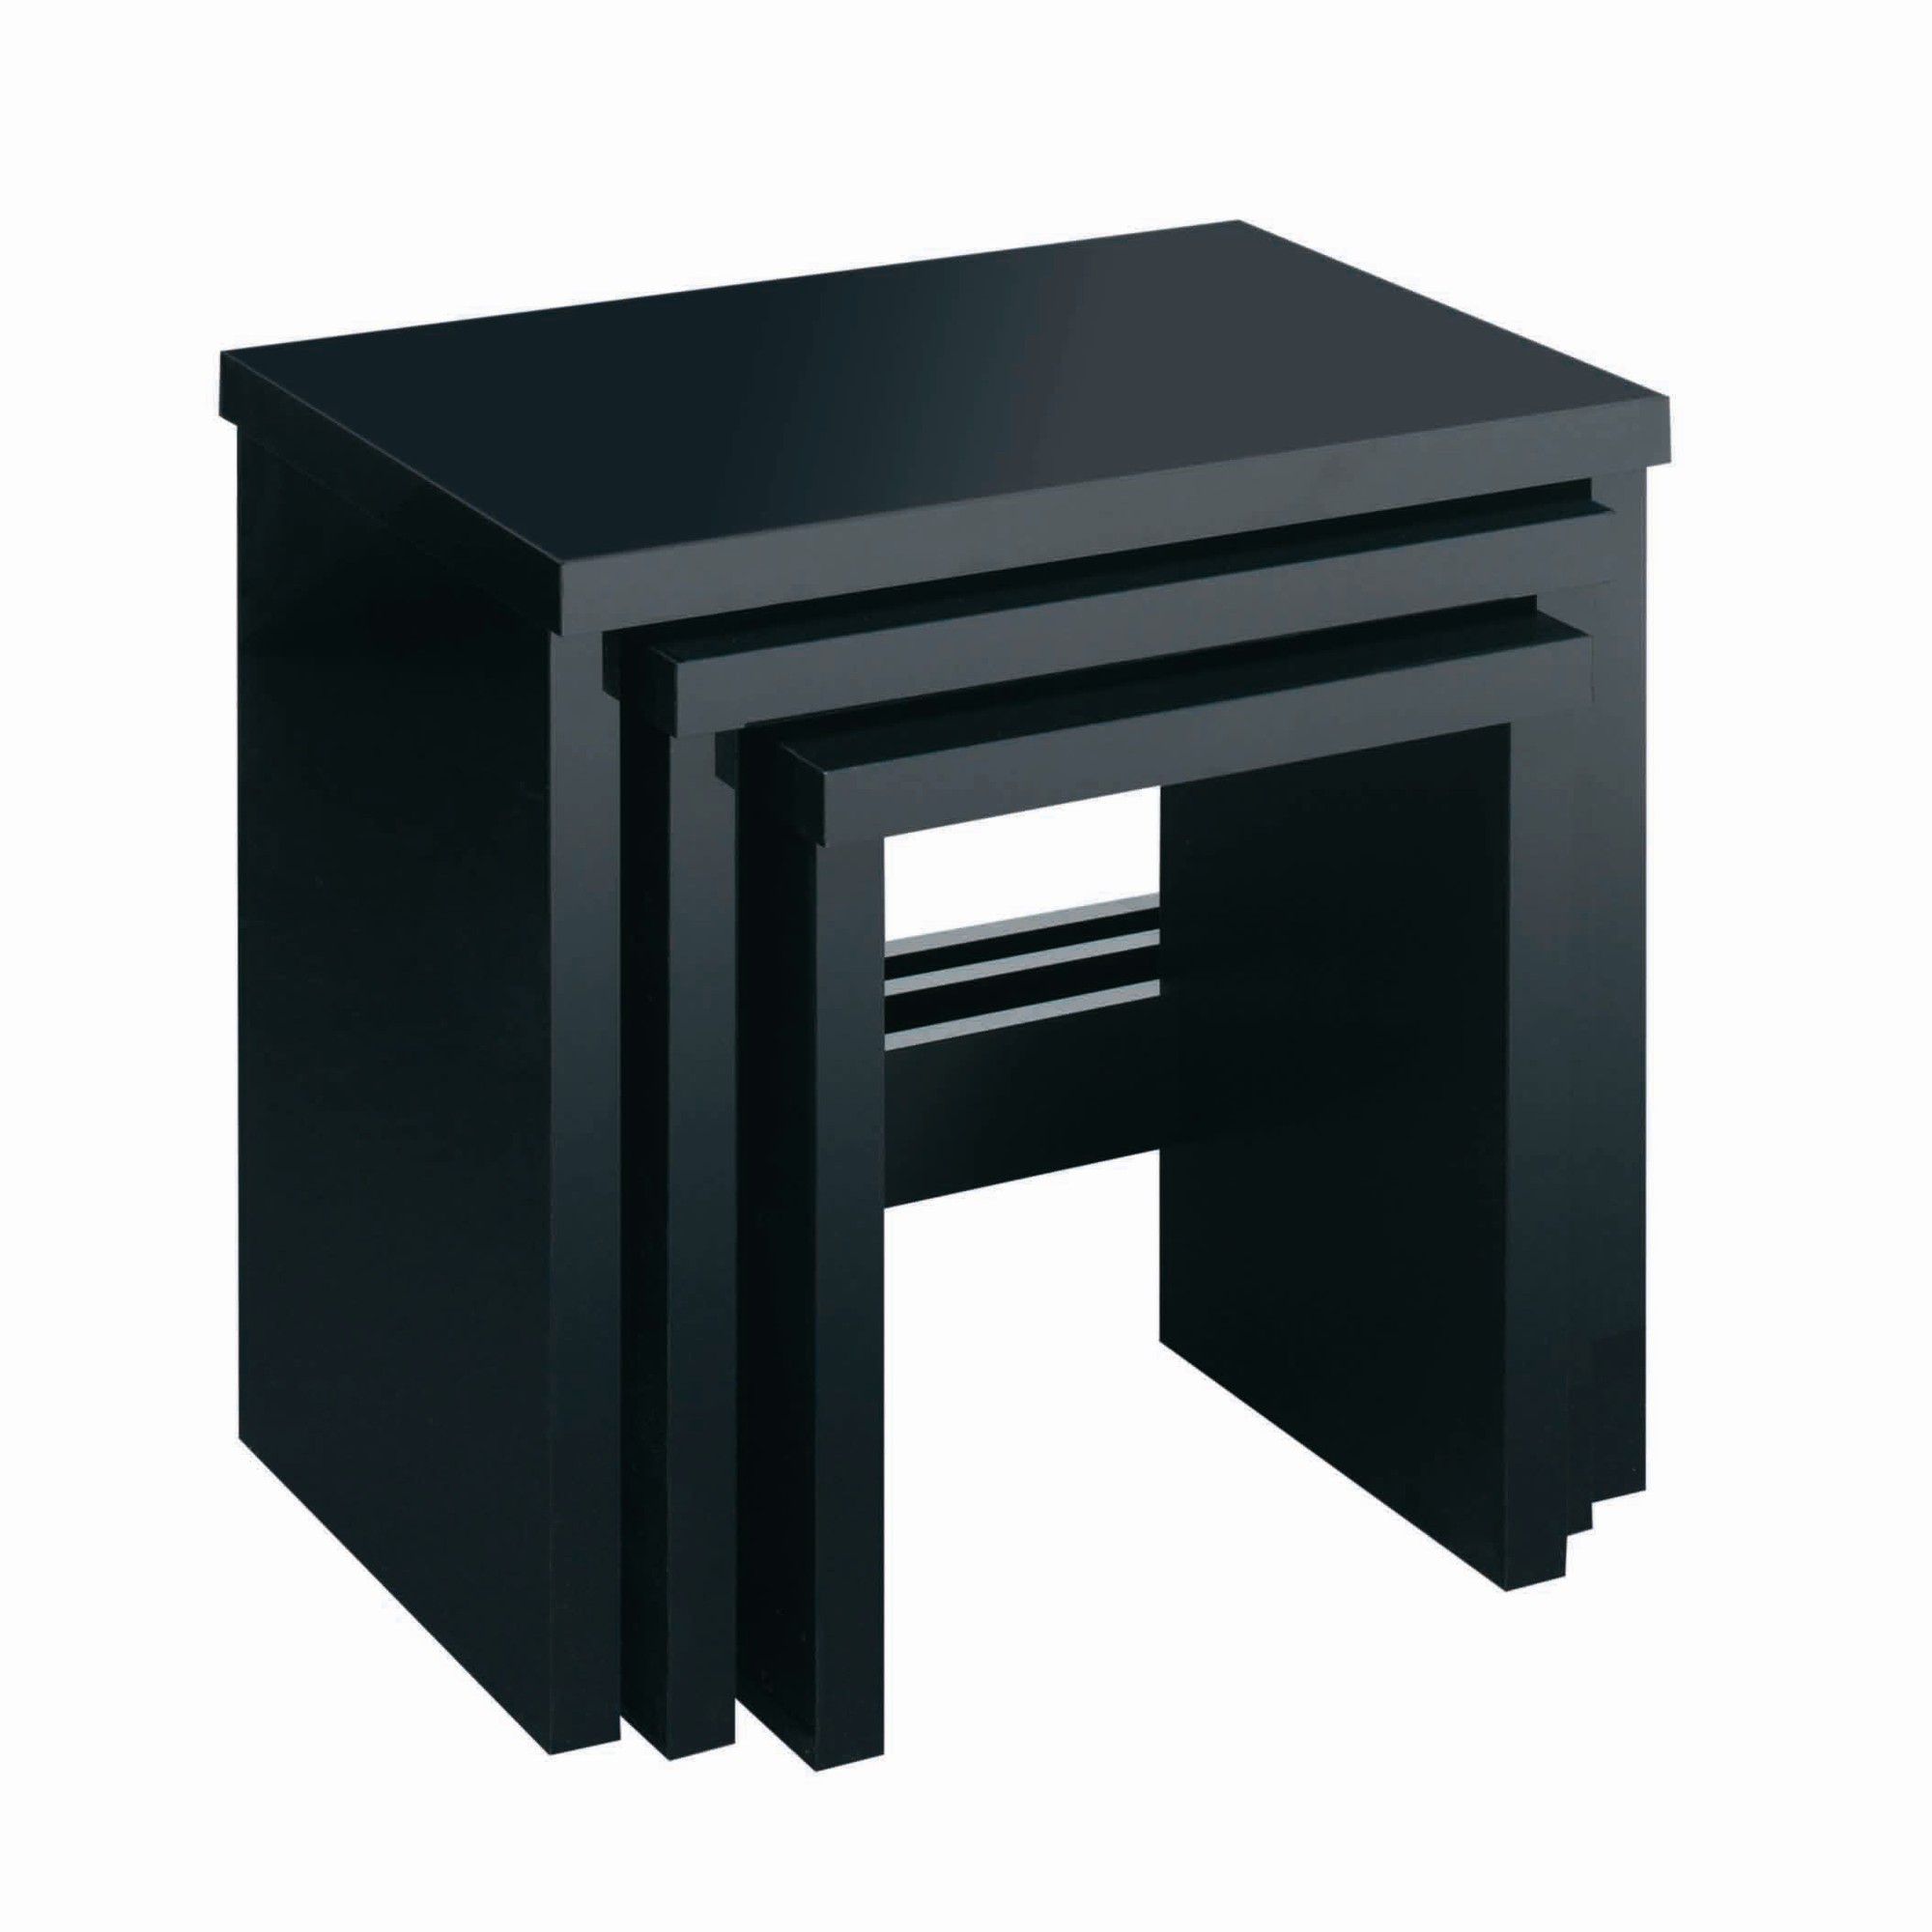 Caxton Manhattan Nest of Tables in Black Gloss at Tesco Direct